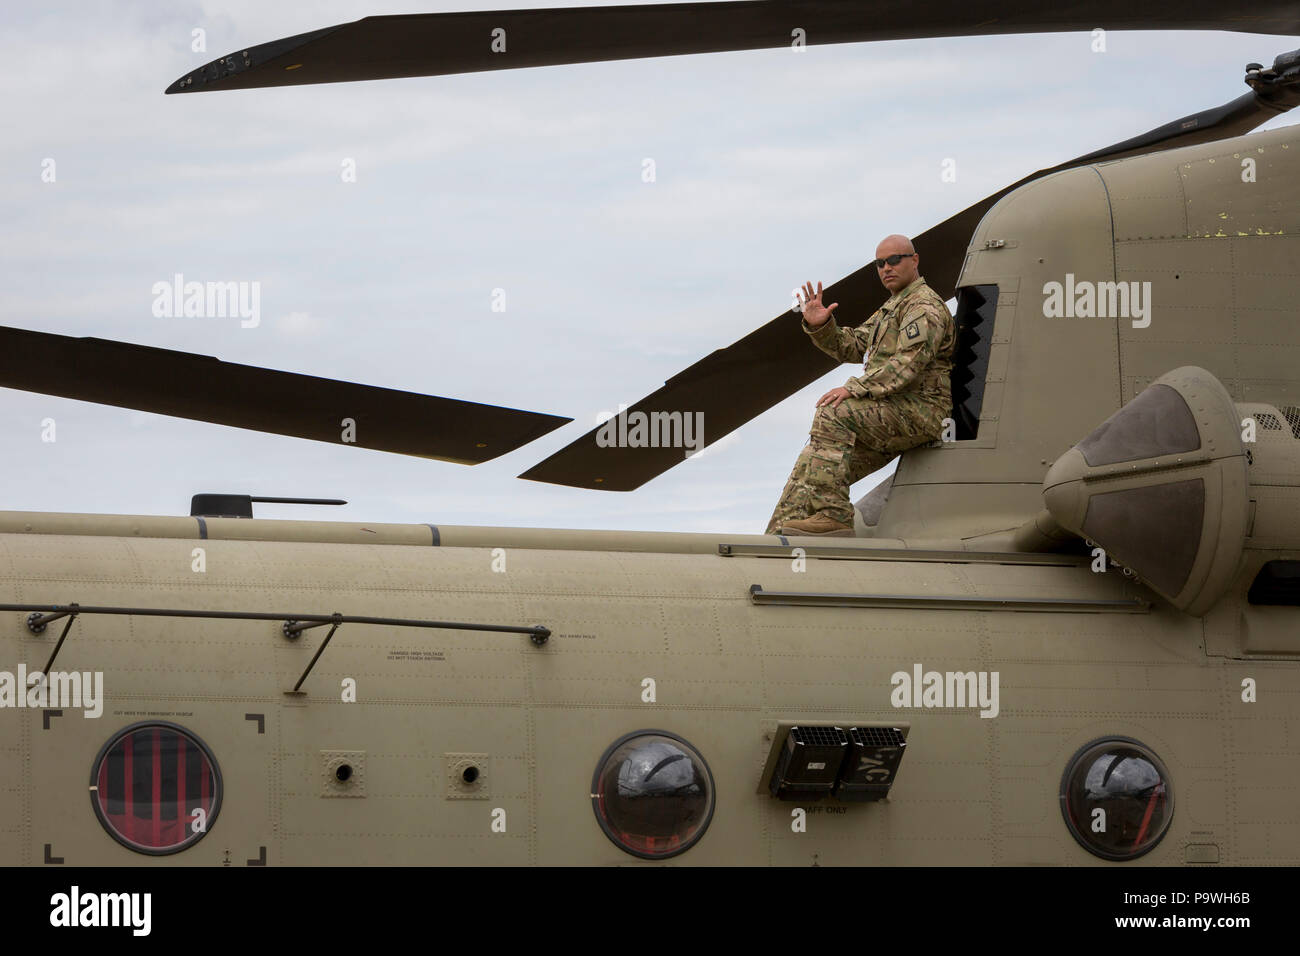 A serviceman with the United States Army watches the flying show from the top of his Chinook helicopter at the Farnborough Airshow, on 18th July 2018, in Farnborough, England. Stock Photo